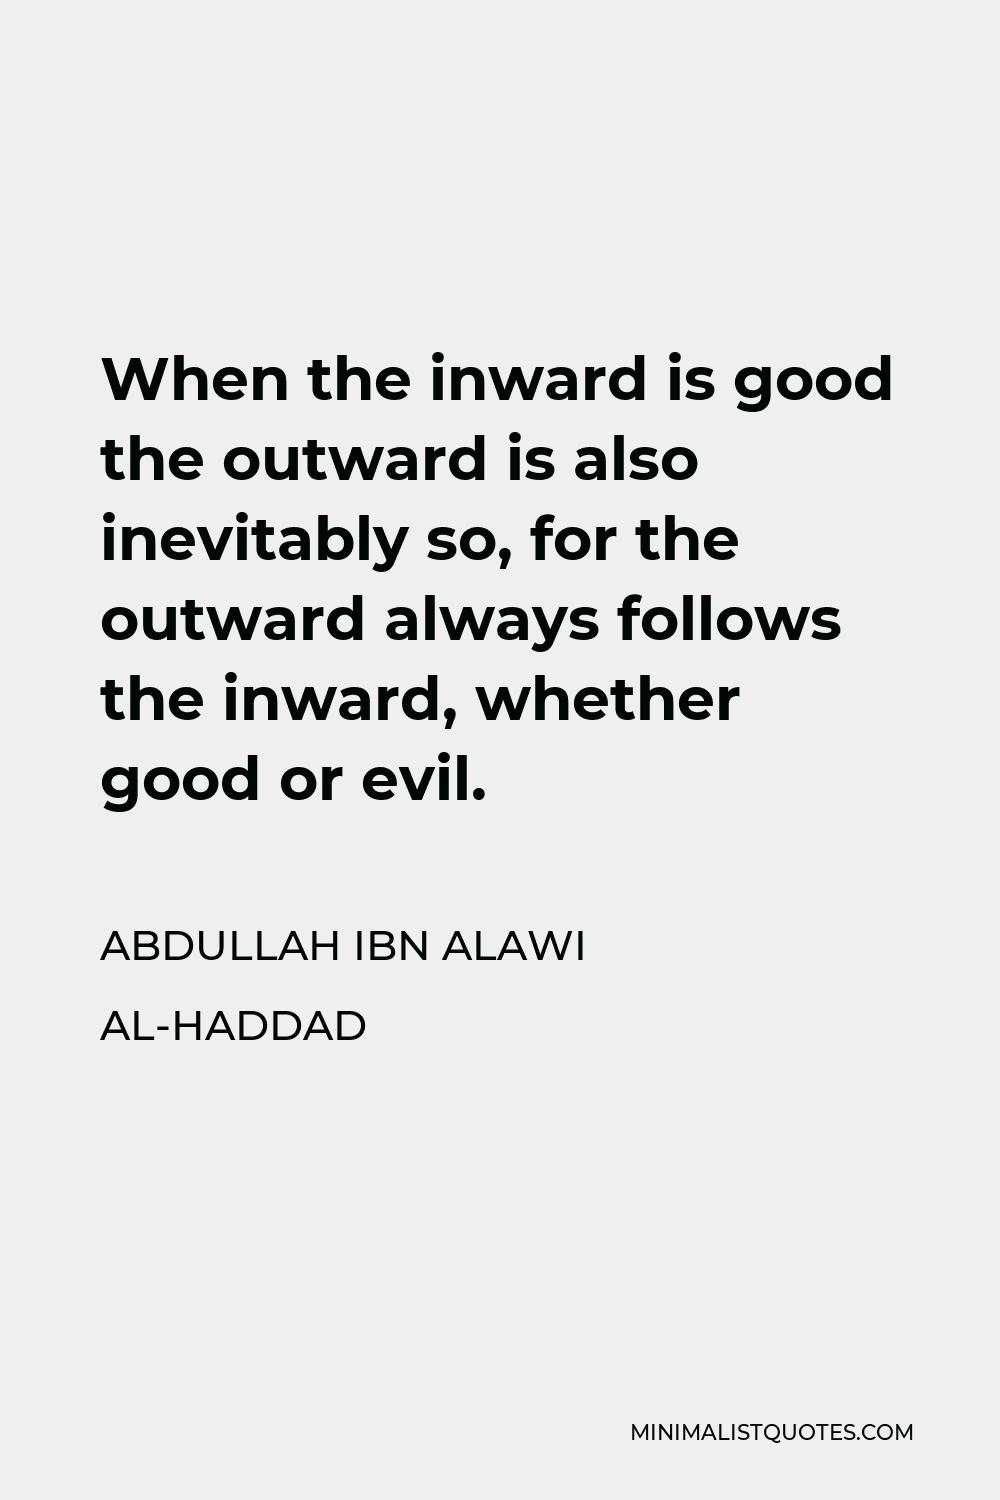 Abdullah ibn Alawi al-Haddad Quote - When the inward is good the outward is also inevitably so, for the outward always follows the inward, whether good or evil.